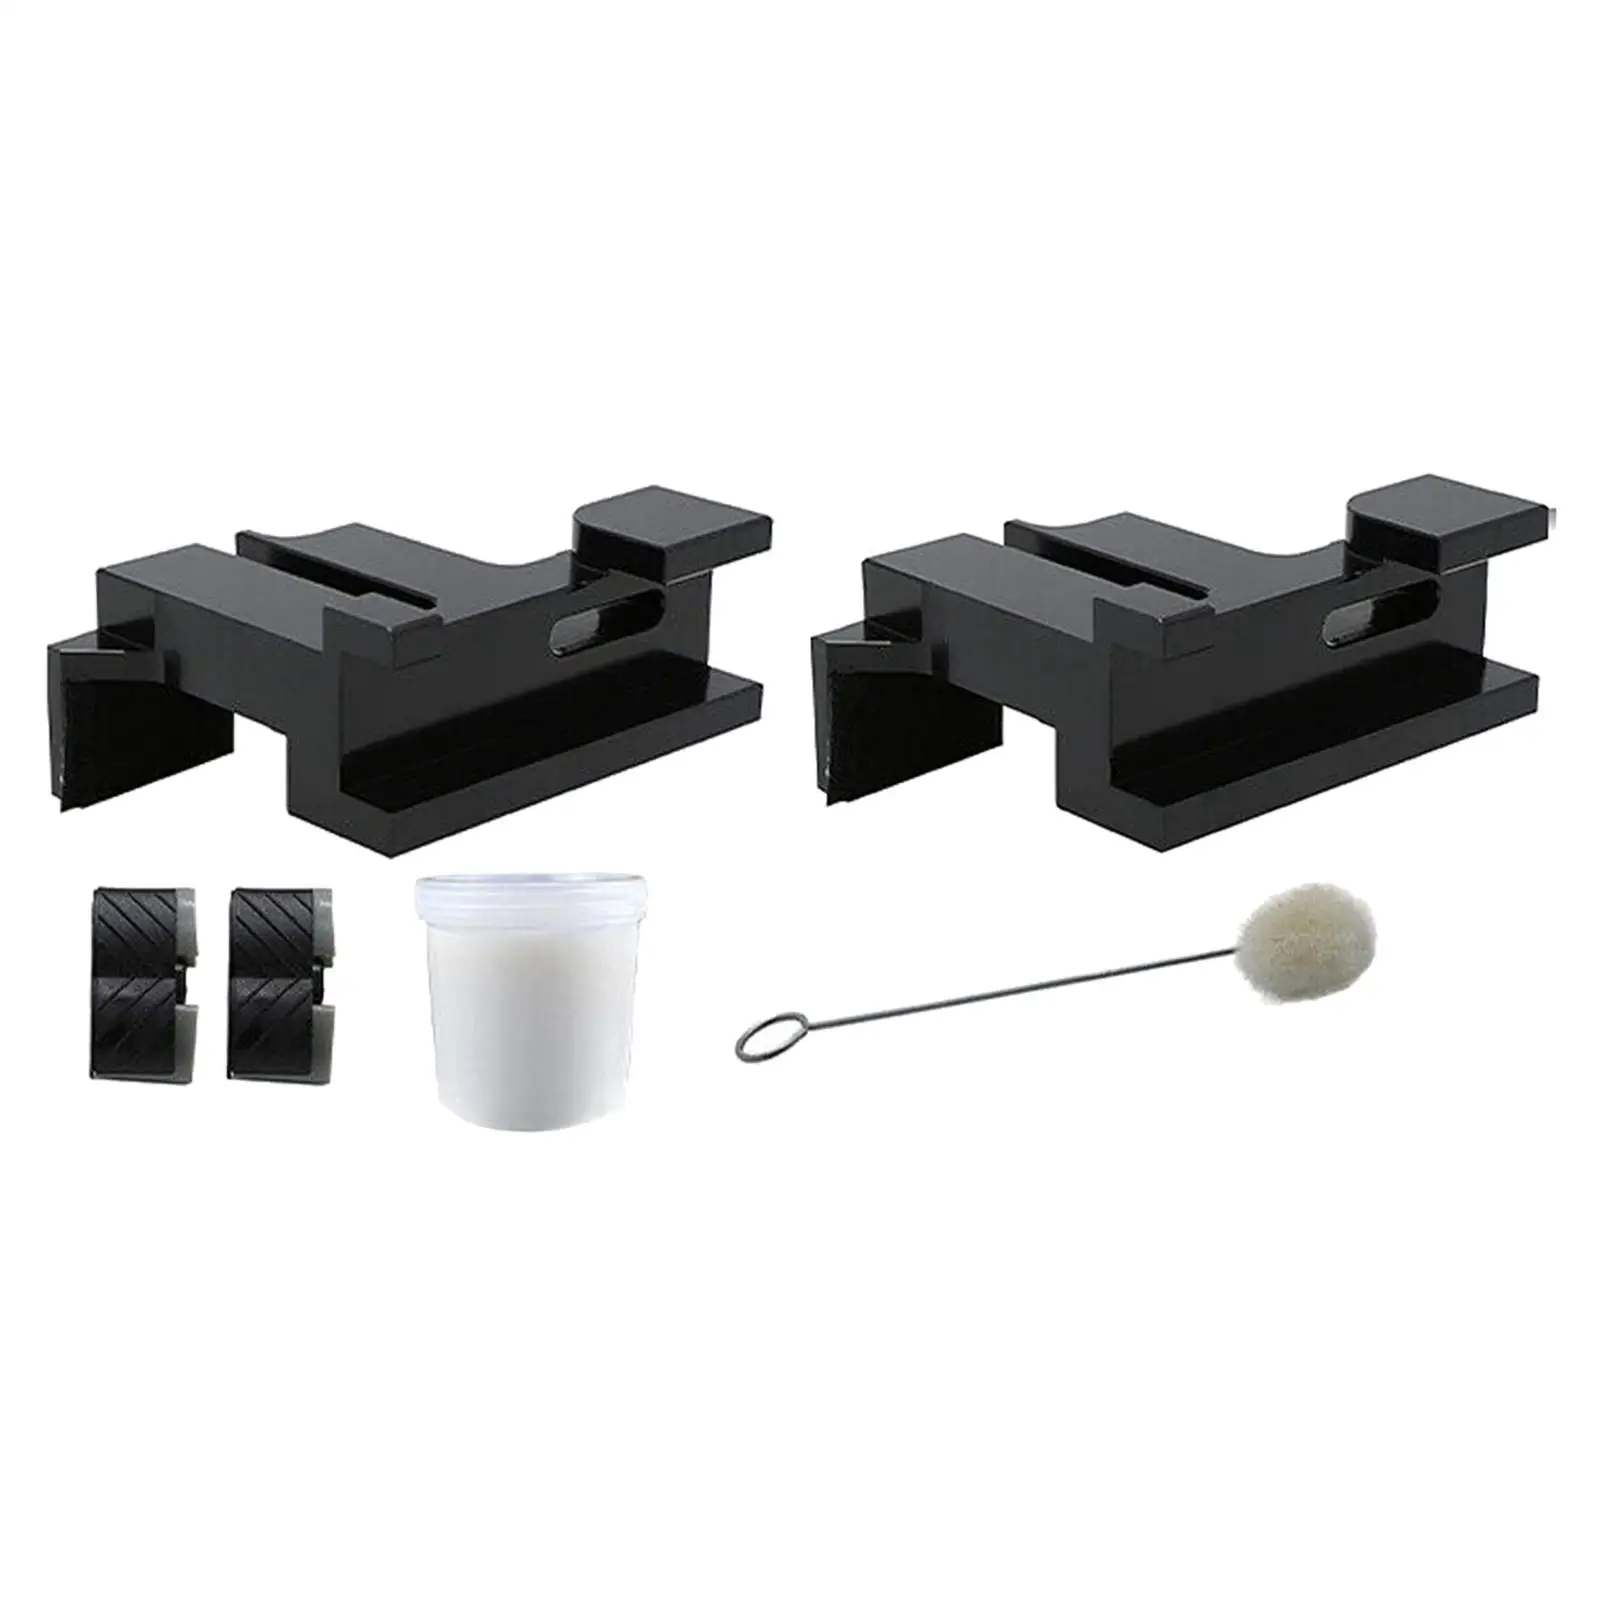 Sunroof Track Repair Set Spare Parts Professional,Durable, High Performance